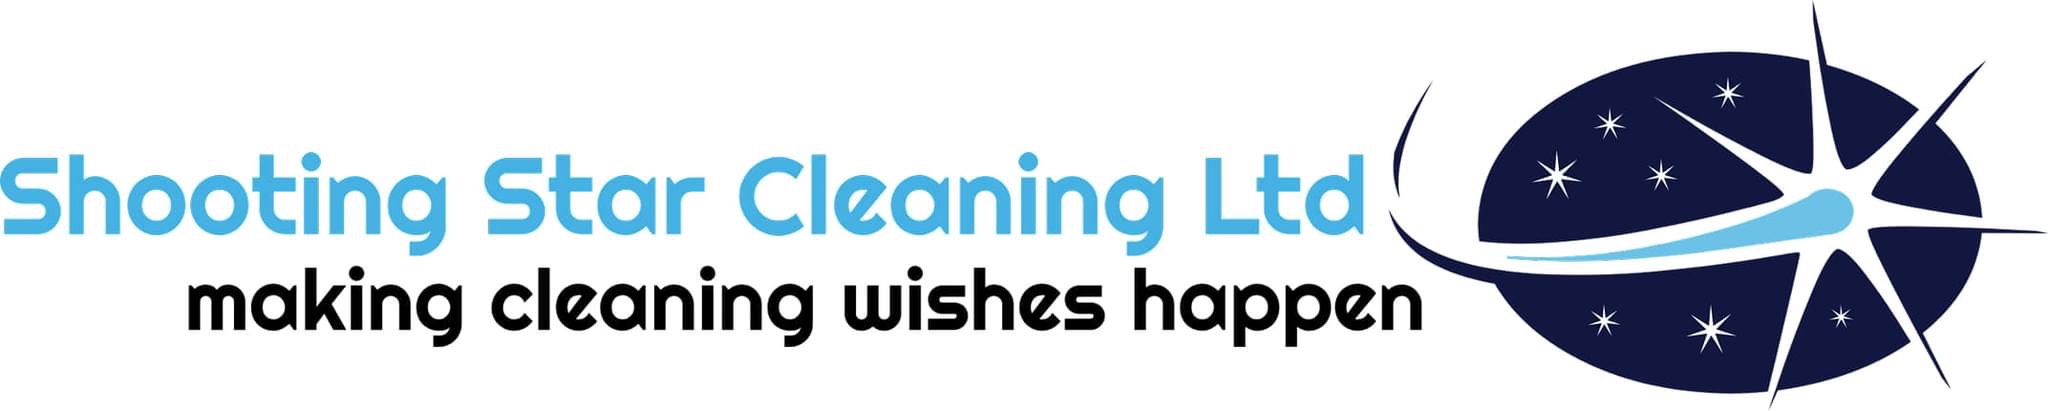 Shooting Star Cleaning Ltd